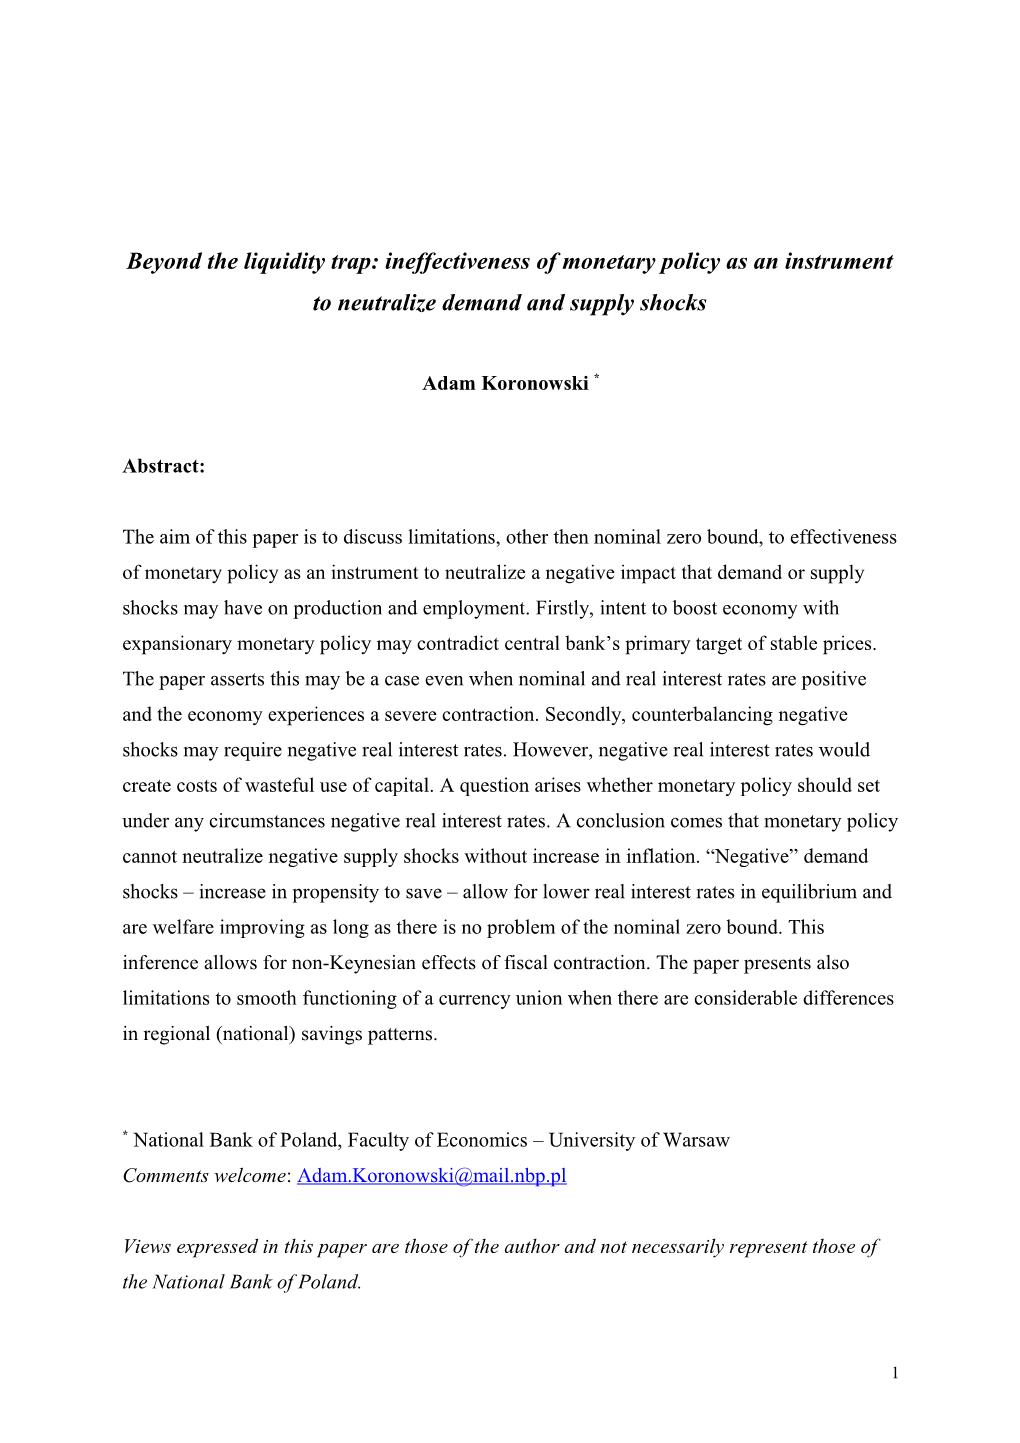 Beyond the Liquidity Trap: Ineffectiveness of Monetary Policy As an Instrument to Neutralize